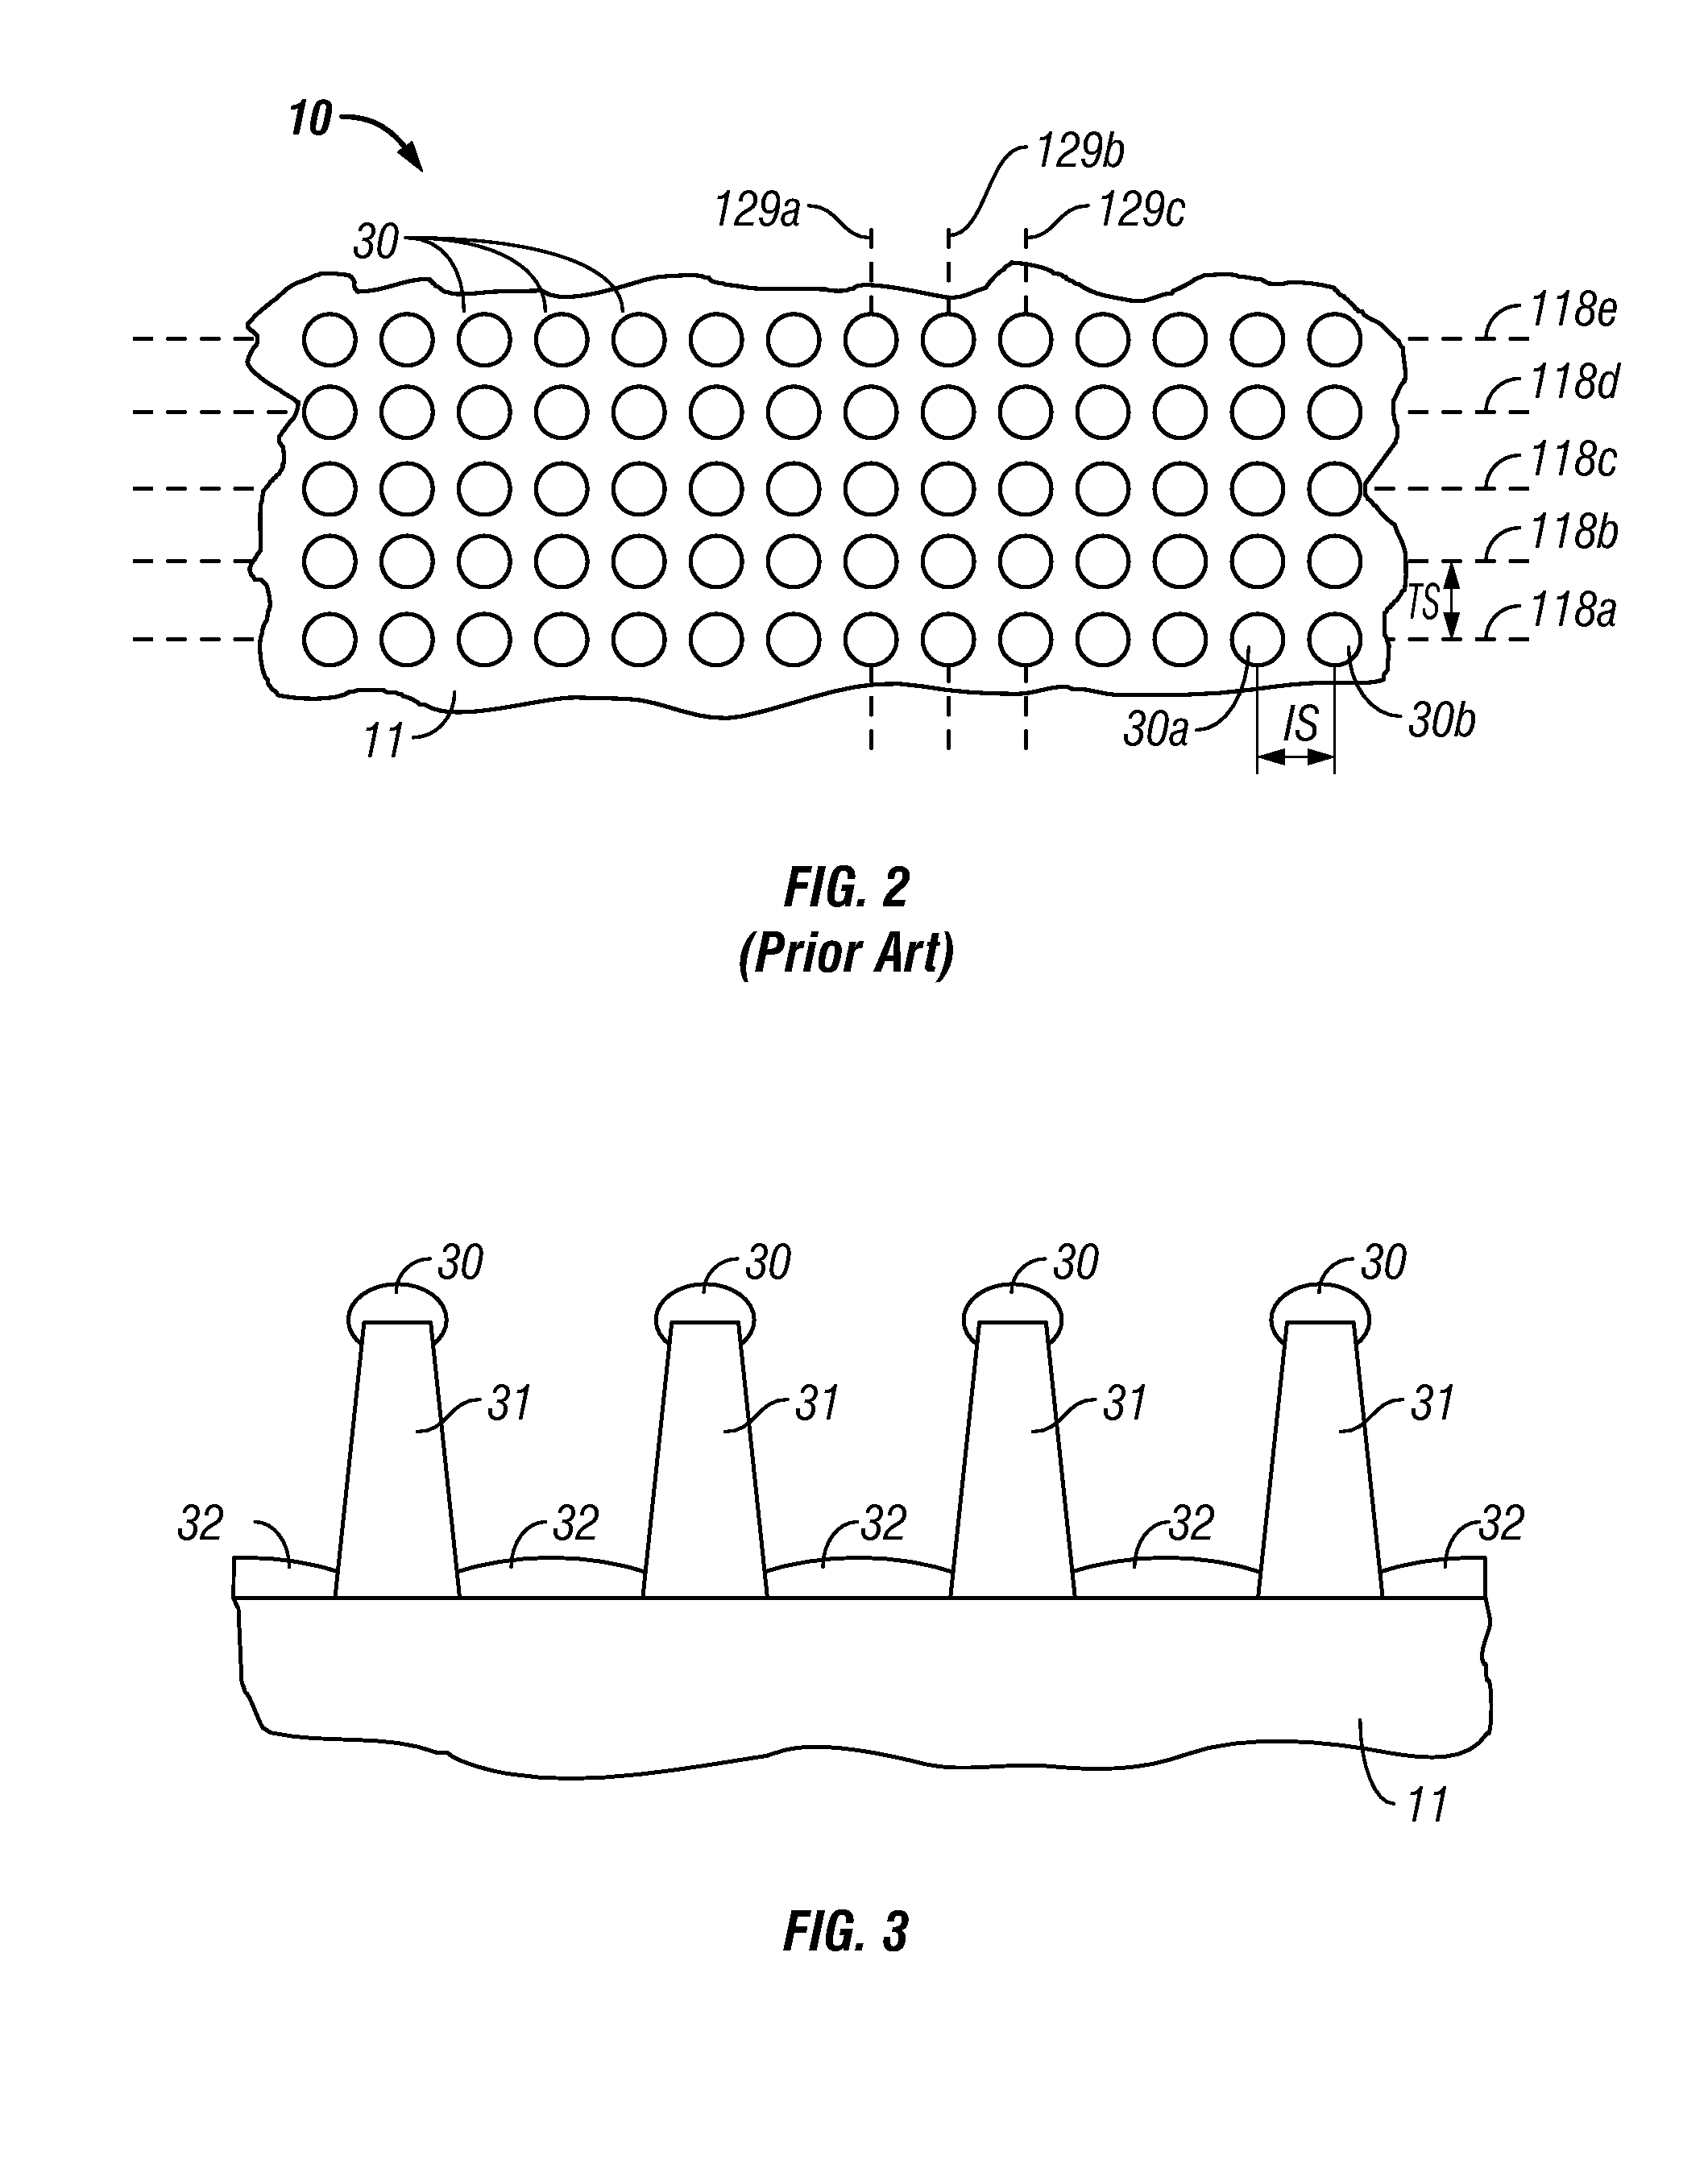 Method using block copolymers for making a master mold with high bit-aspect-ratio for nanoimprinting patterned magnetic recording disks